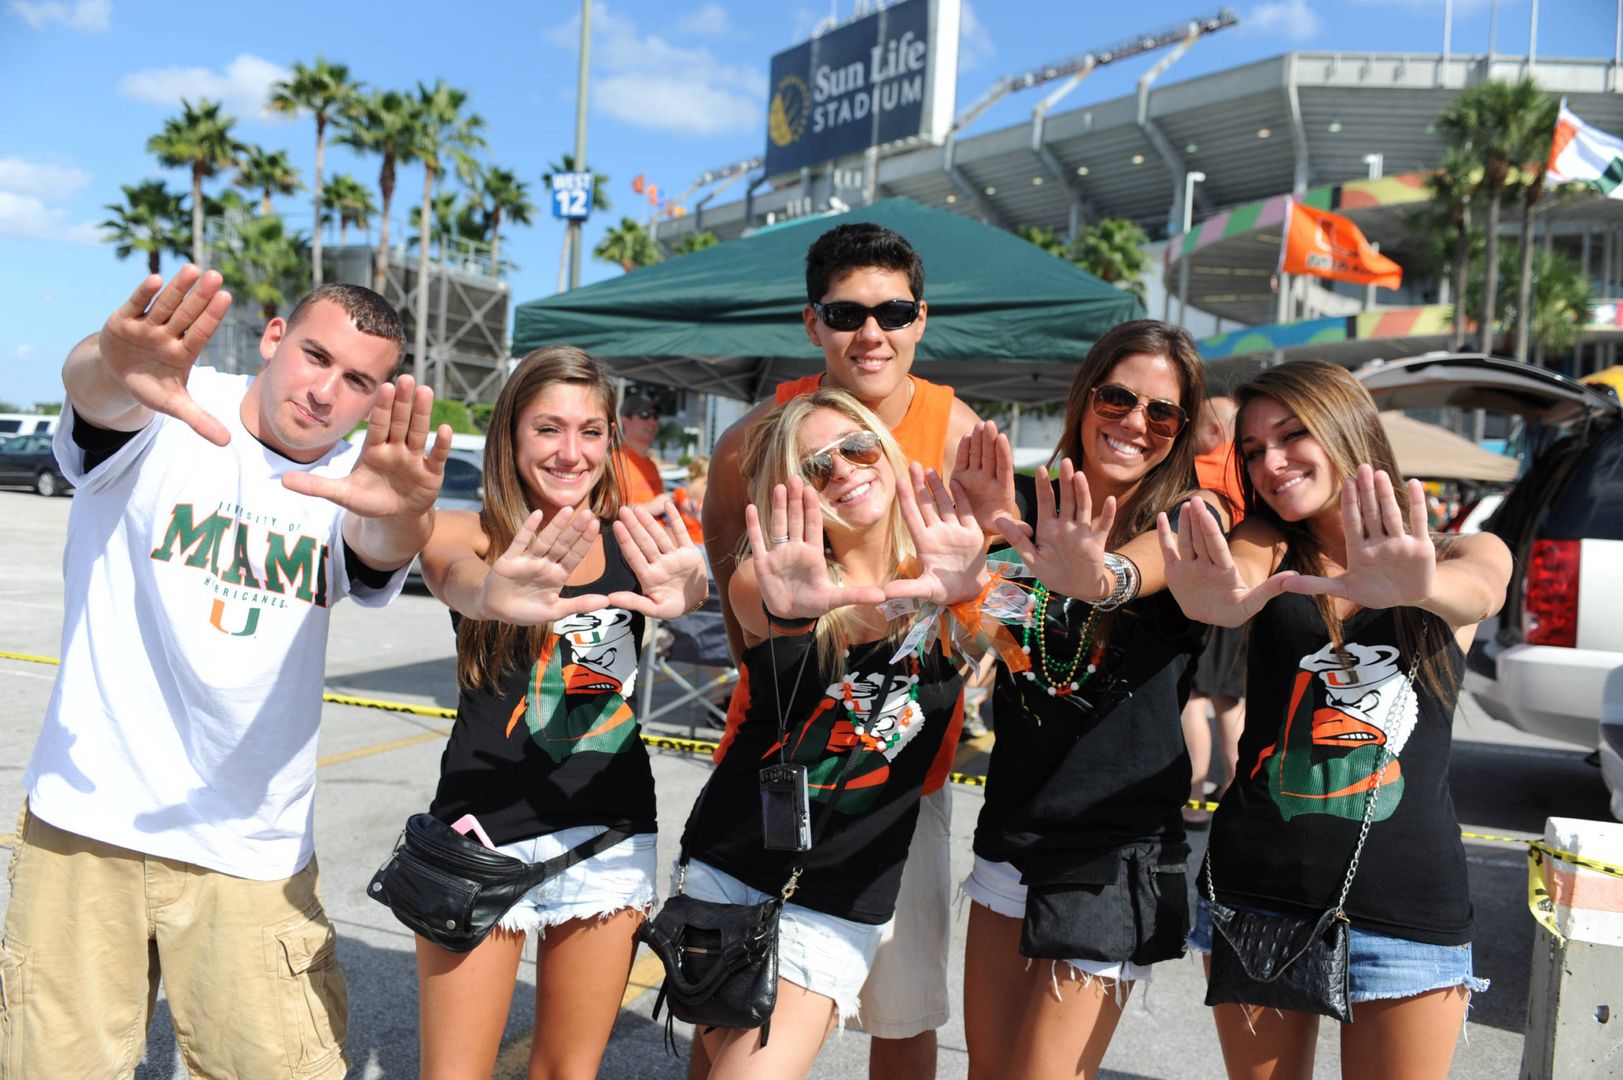 Reason No. 17 to Attend BankUnited #CanesFest